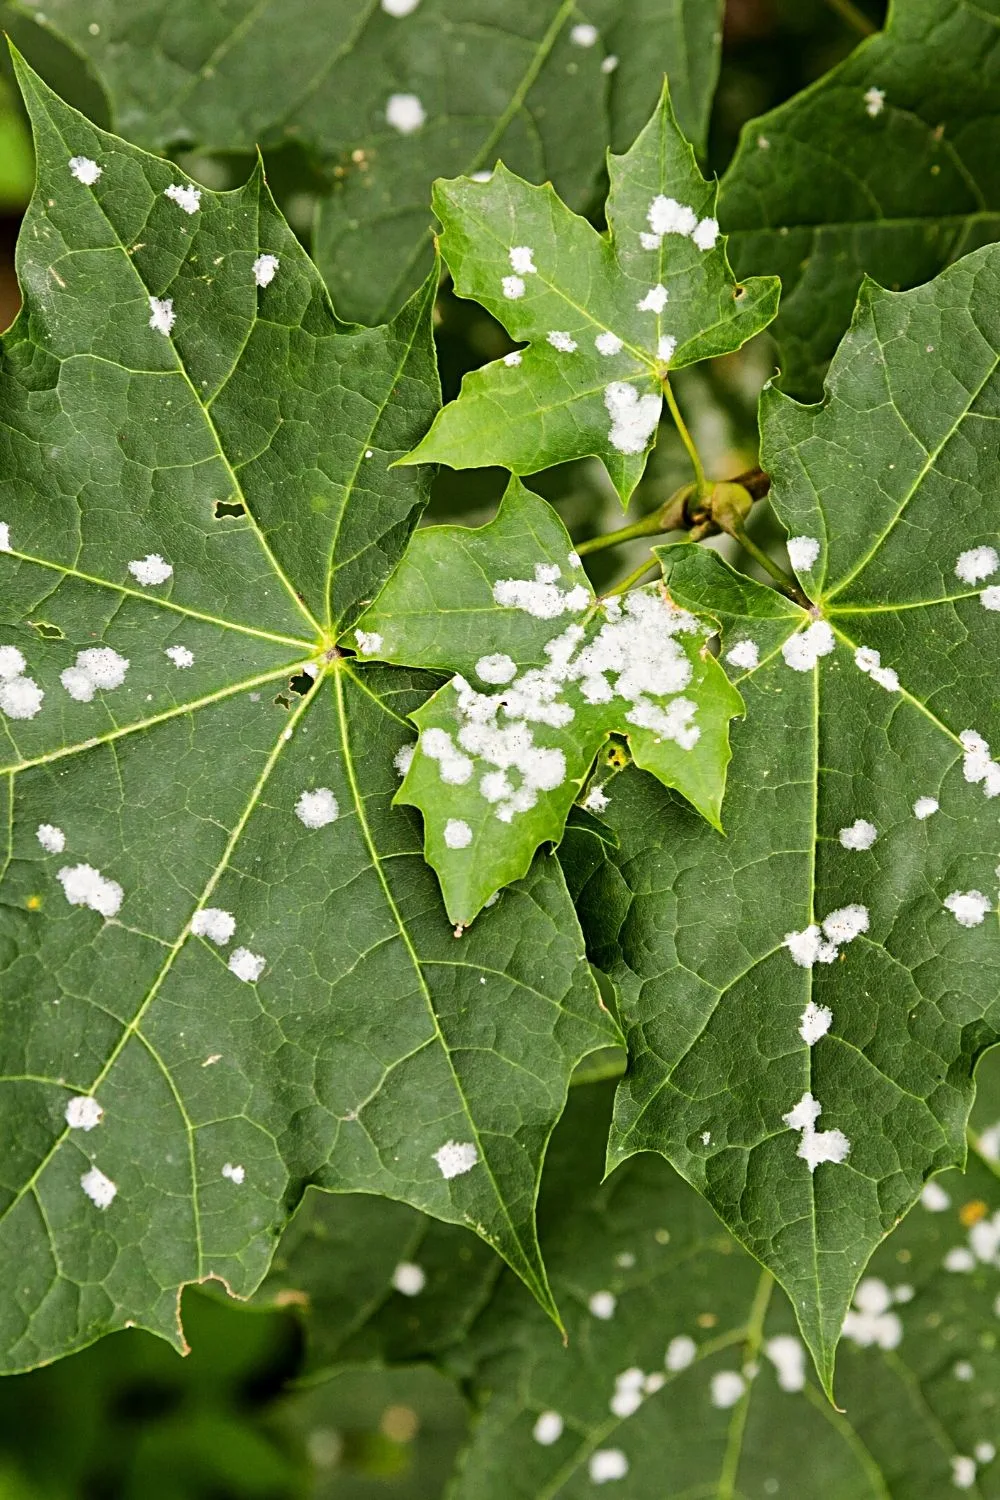 In early stages, a plant infested with powdery mildew has white spots on its leaves